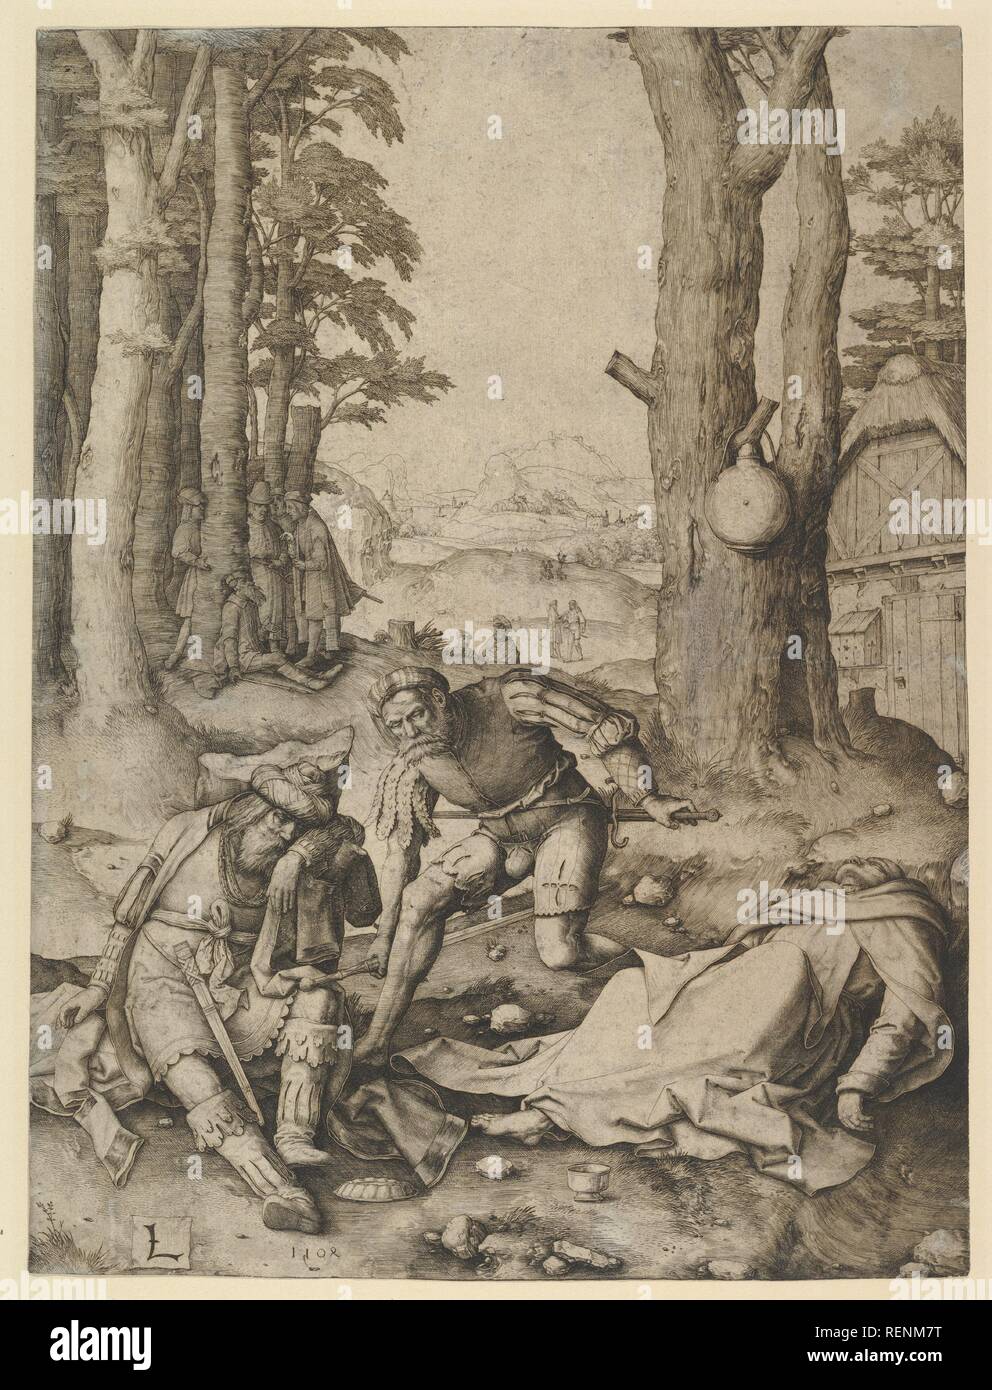 Mohammed and the Monk Sergius. Artist: Lucas van Leyden (Netherlandish, Leiden ca. 1494-1533 Leiden). Dimensions: sheet: 11 1/4 x 8 7/16 in. (28.6 x 21.5 cm) (trimmed to plate line). Date: 1508.  The subject of this print is a rarely illustrated episode from the popular medieval book The Travels of Sir John Mandeville. One night, while Mohammed, the monk's student, was asleep, his men killed the hermit with Mohammed's own sword and put it back into   its sheath. As Mohammed awoke, they persuaded him that he was the killer. Master storyteller Lucas van Leyden takes great delight in describing e Stock Photo